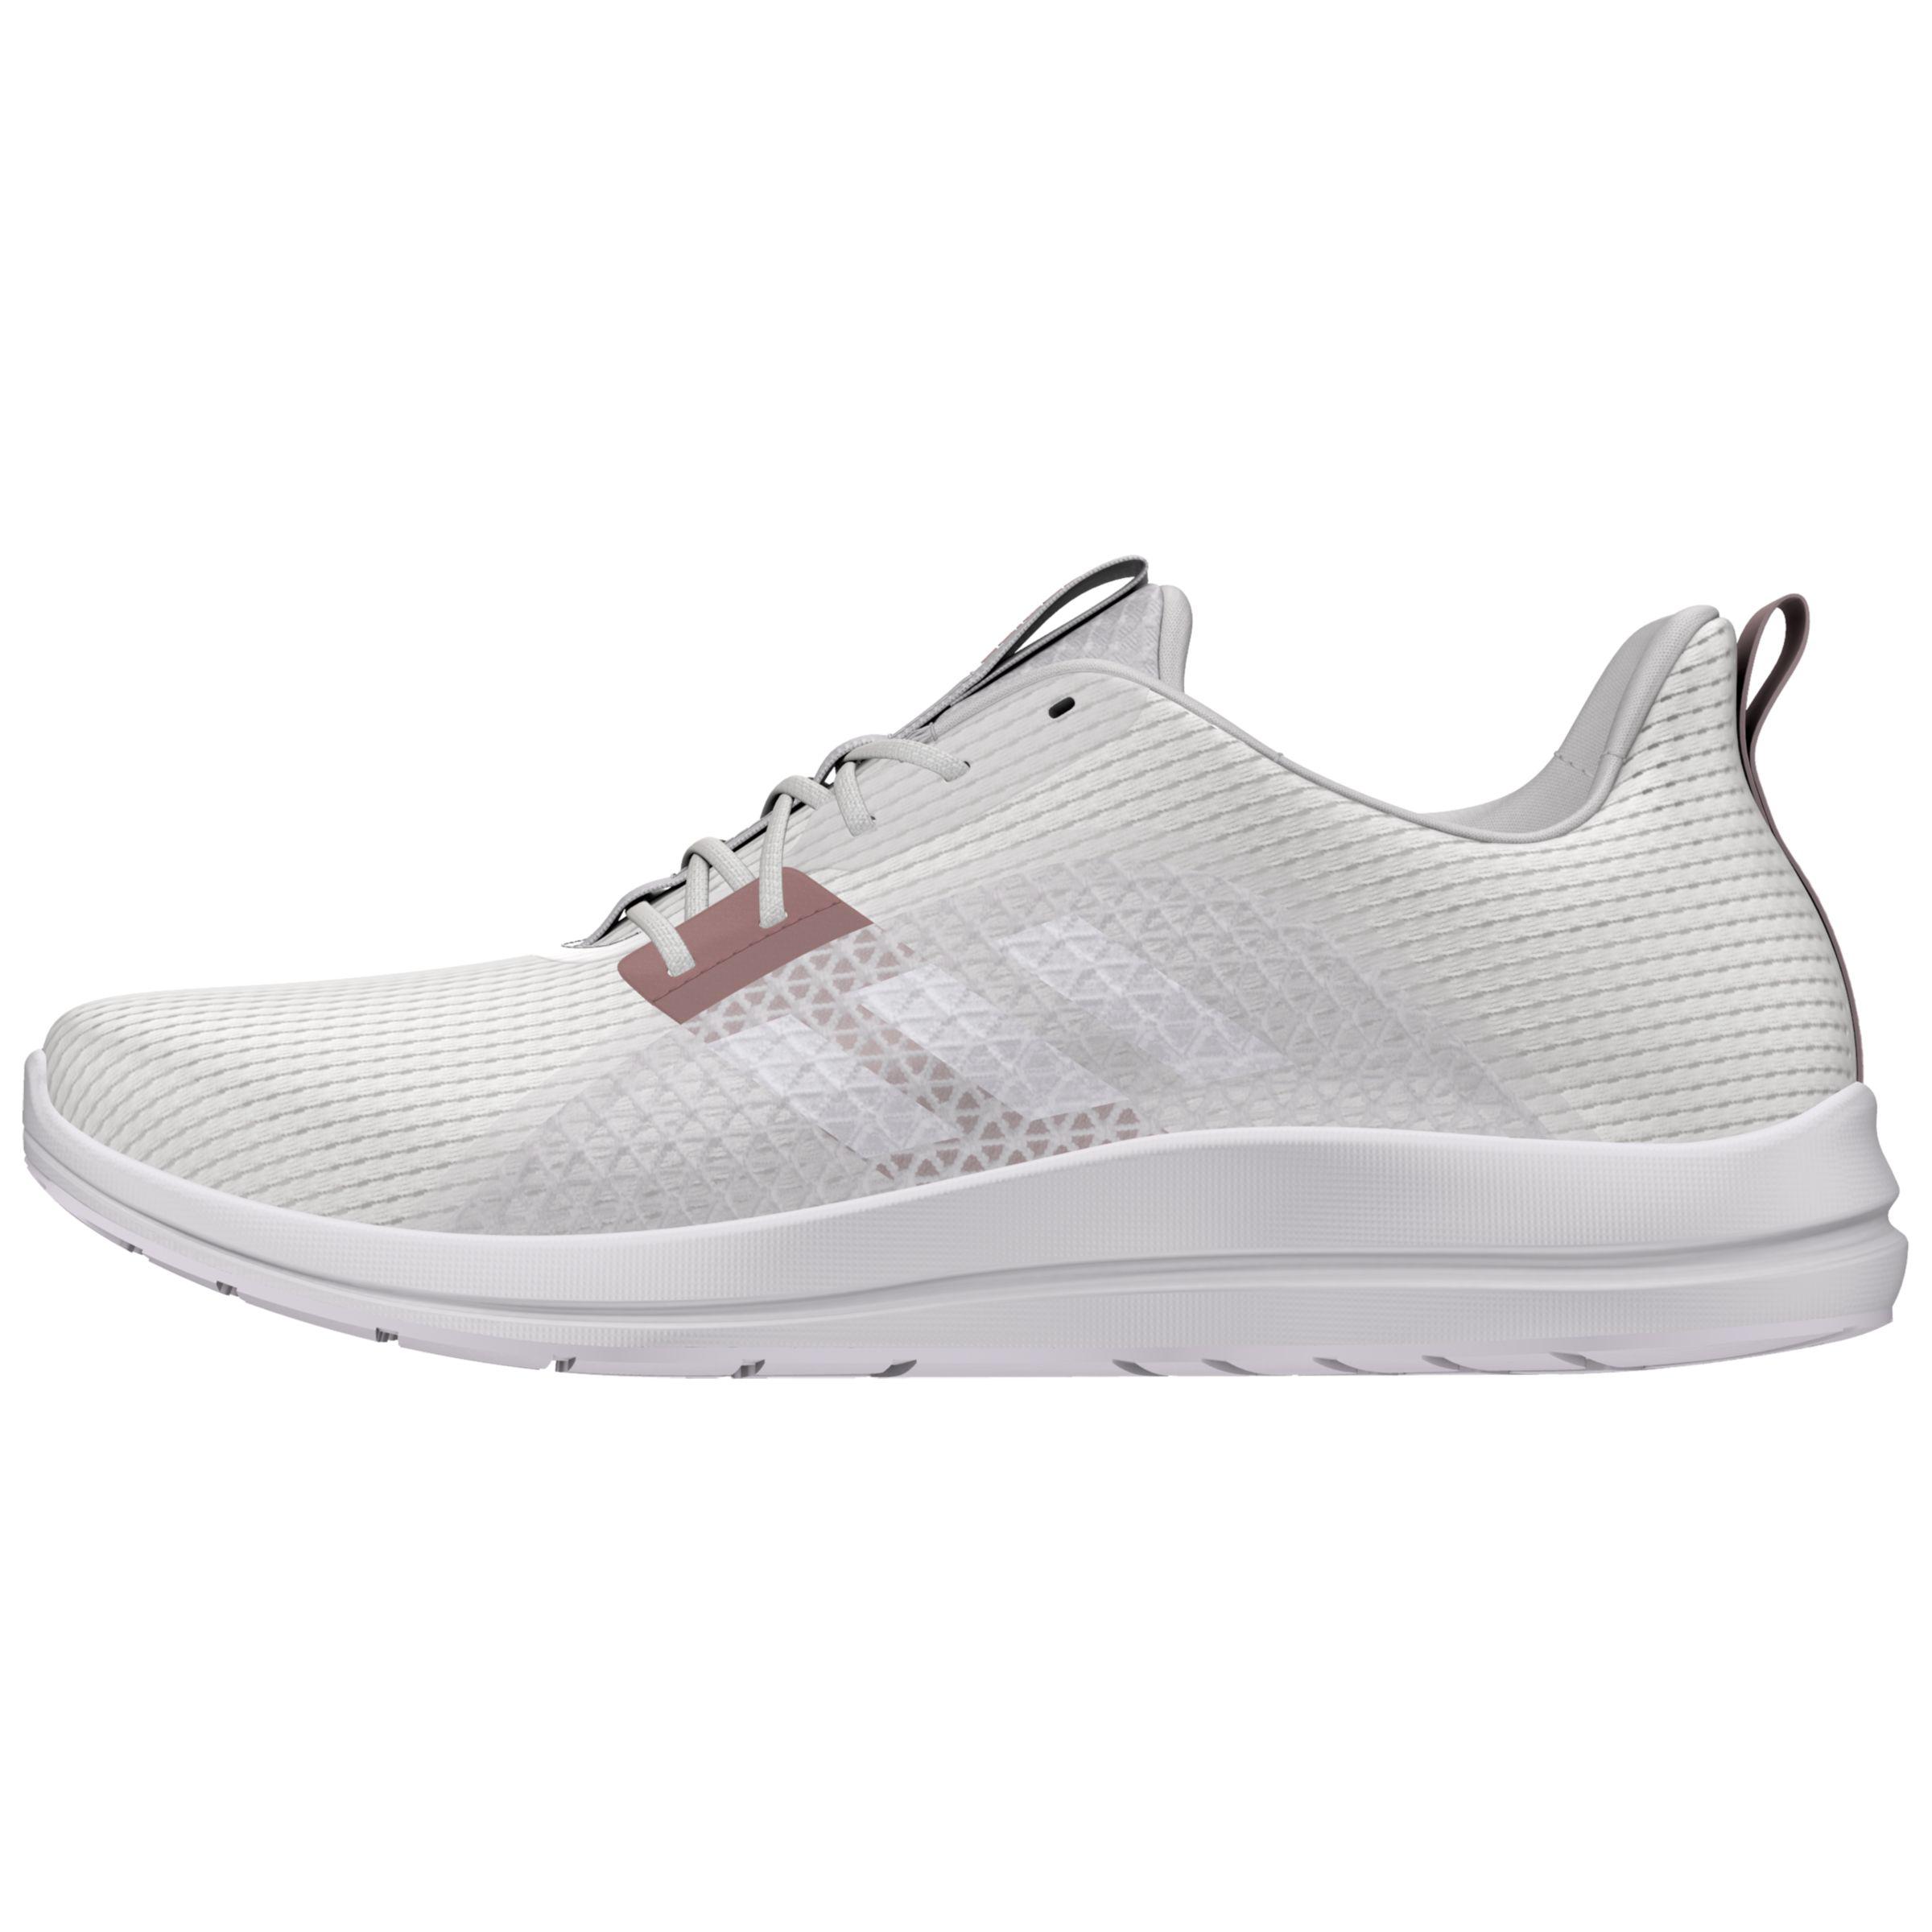 adidas Synthetic Element V Women's Running Shoes in White - Lyst